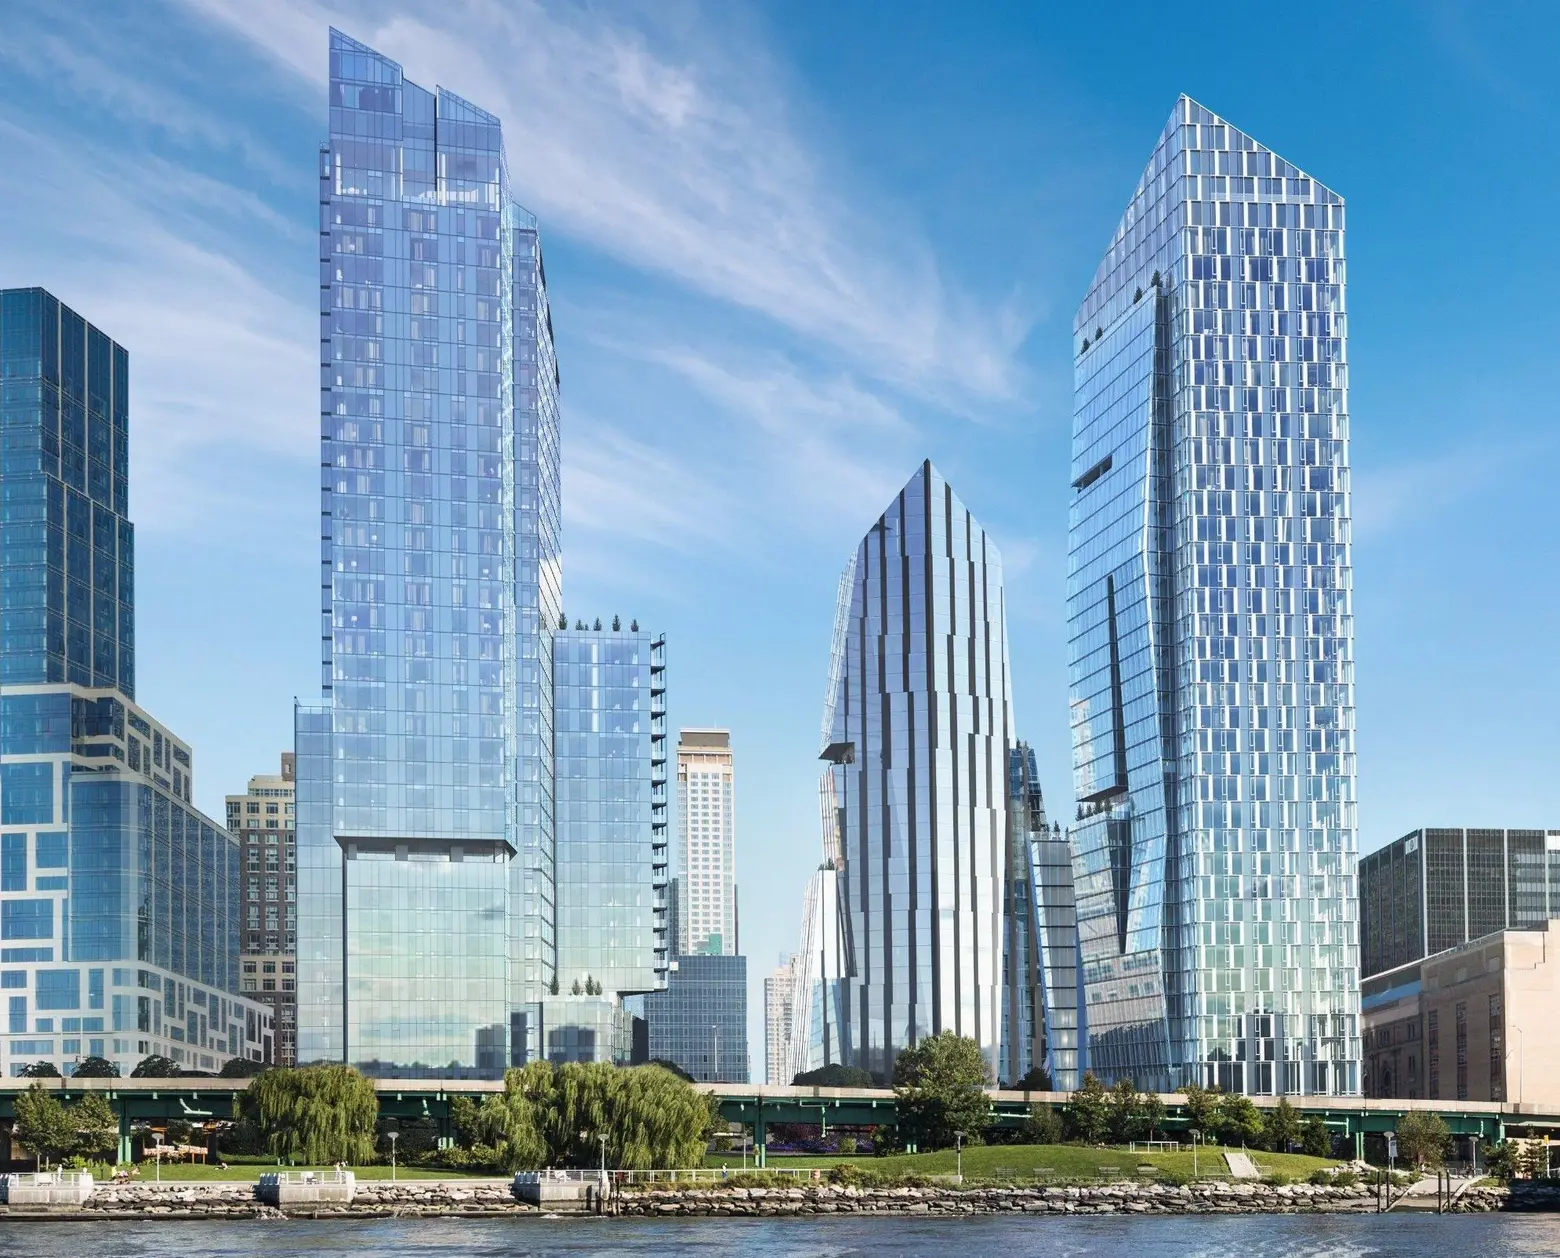 Pricing revealed for starchitect-designed Waterline Square rentals, with studios from $3,938/month